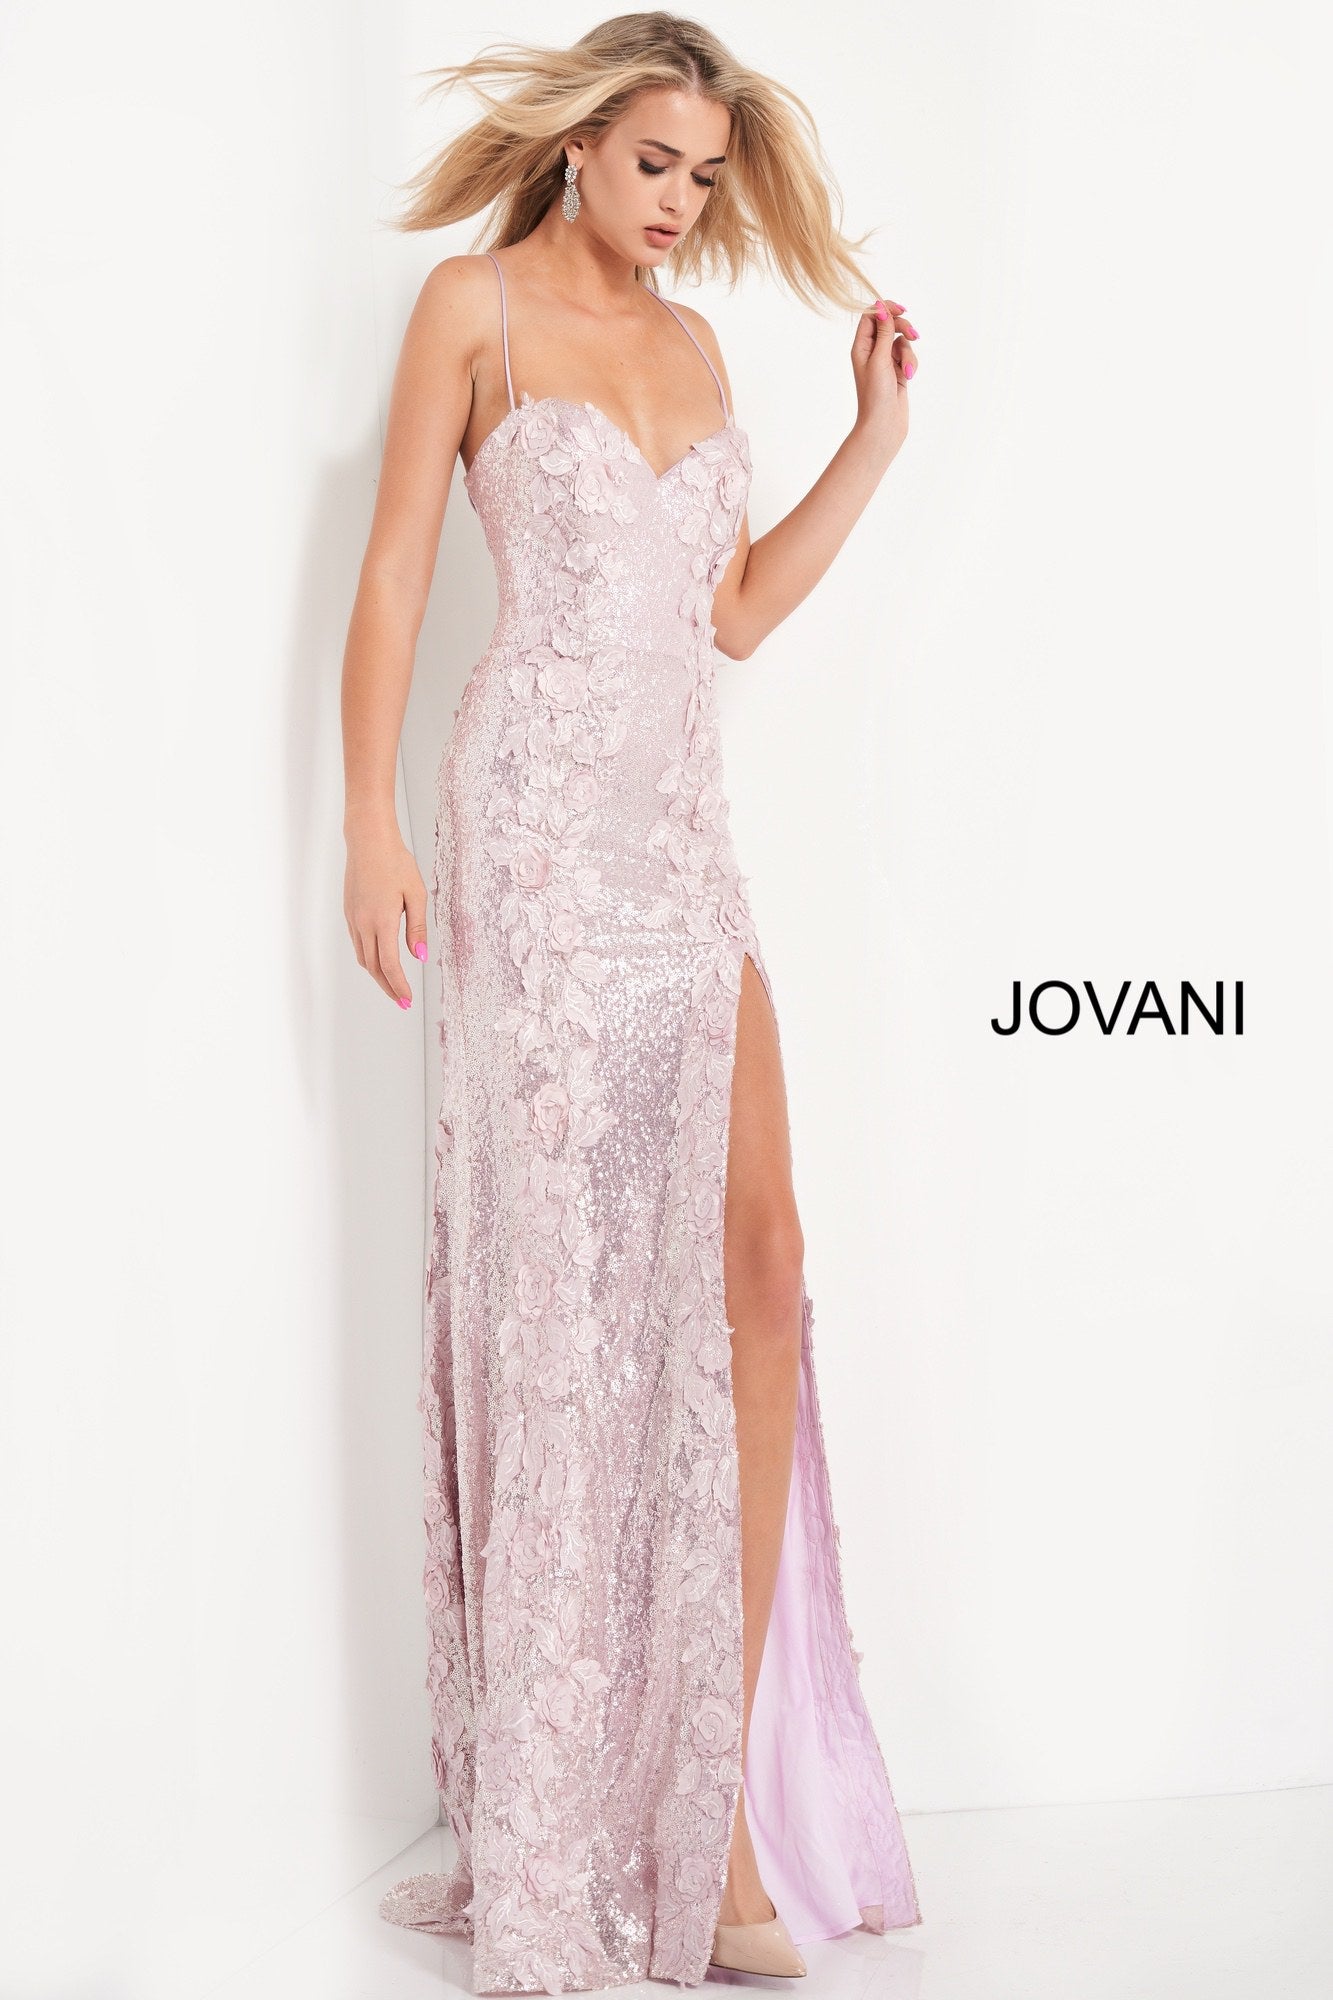 Jovani 06109 is a Long Fitted Sequin Embellished Formal Evening Gown. This Sweetheart neckline prom dress has spaghetti straps that lead around to an open back with a lace up corset tie closure. Detailed 3D Floral Appliques Embellished the fitted bodice & Cascade down the length of this gorgeous Pageant Gown. Thigh Slit in Skirt. Embellishments also adorn the back length of the Gown trailing into a Lush sequin sweeping train.